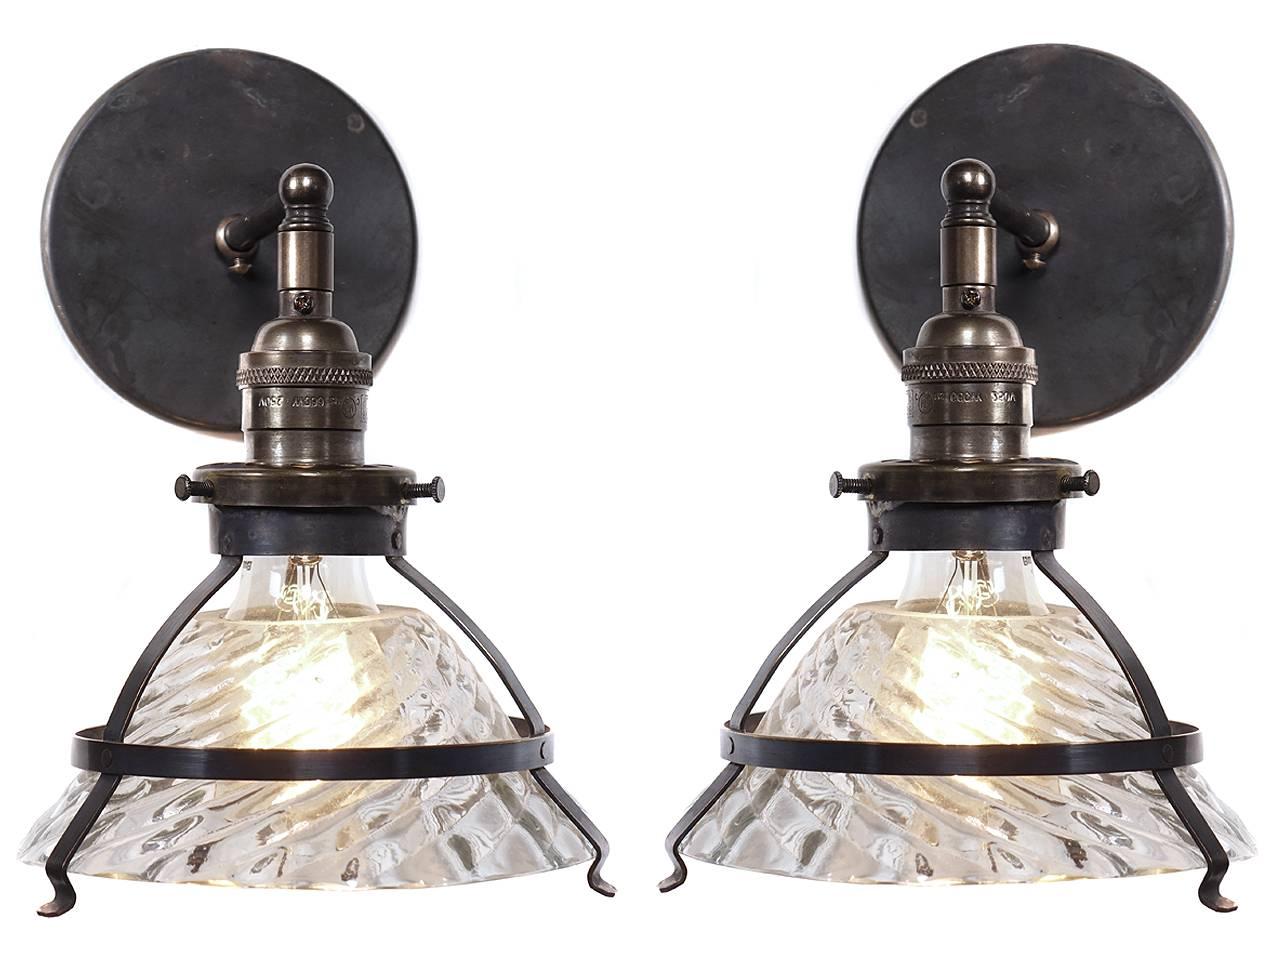 This is a unique industrial snap-in shade fixture. This style of shade was made by the X-Ray Lamp Company as reflectors inside larger lamps. Believe it or not these were never meant to be seen. They have an elegant and complex industrial look. They